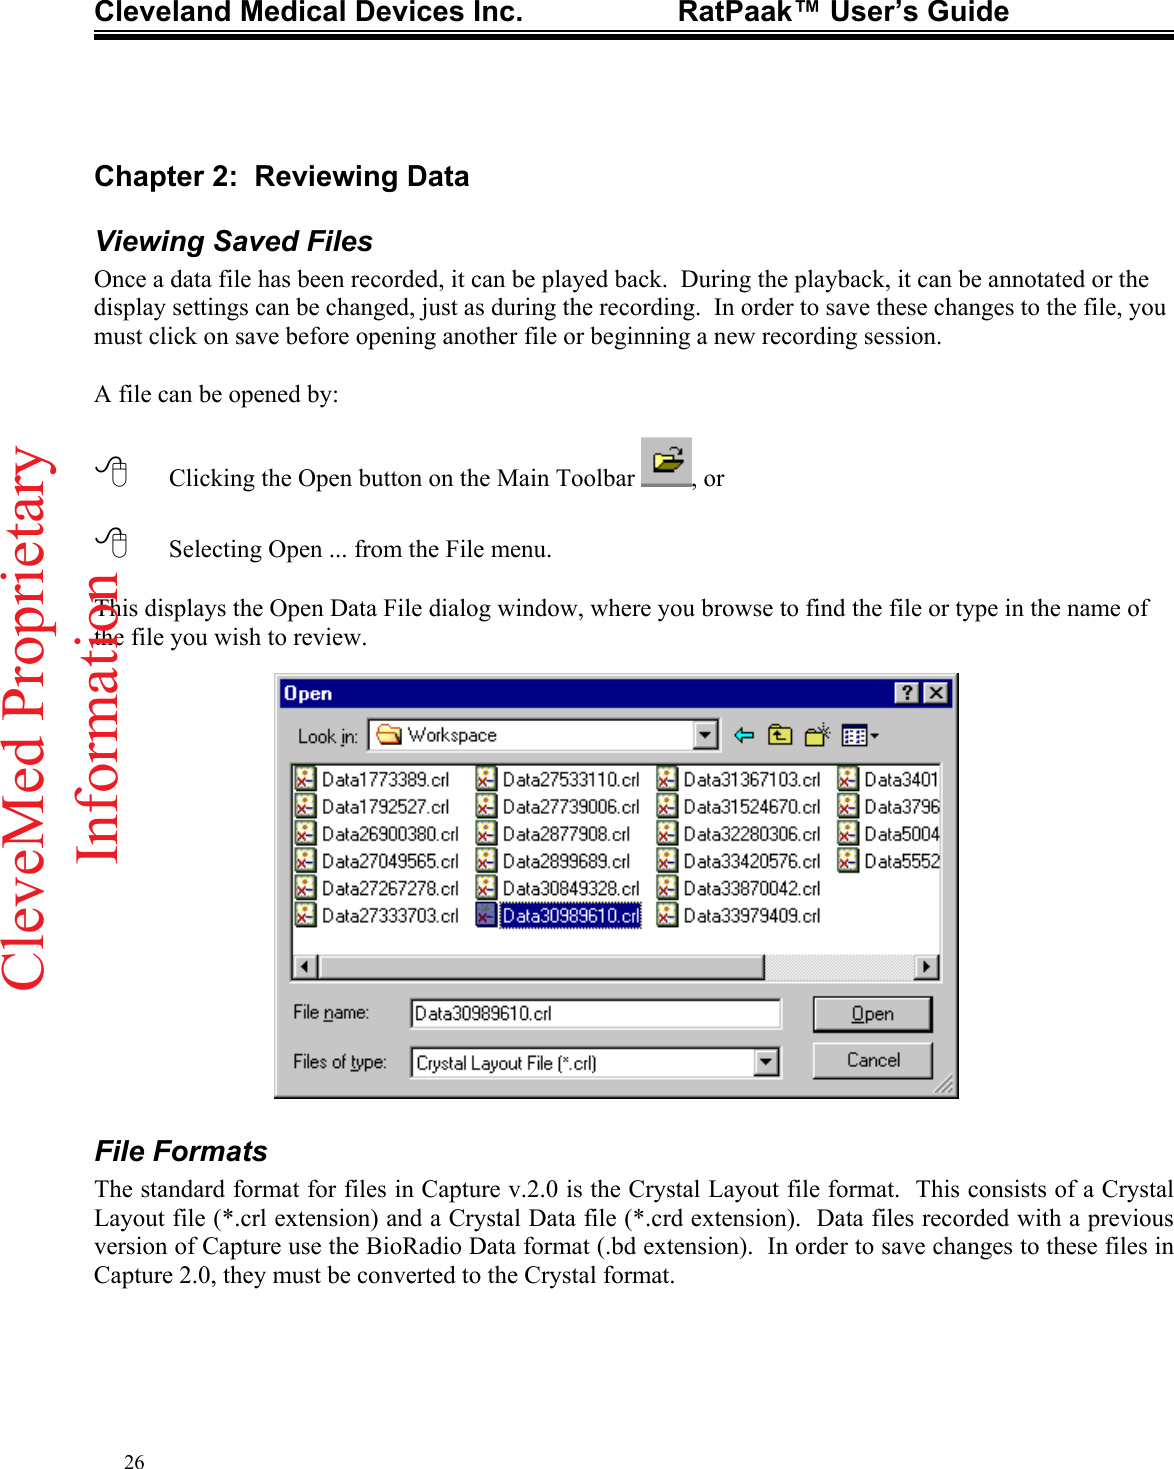 Cleveland Medical Devices Inc.                   RatPaak™ User’s Guide   Chapter 2:  Reviewing Data Viewing Saved Files Once a data file has been recorded, it can be played back.  During the playback, it can be annotated or the display settings can be changed, just as during the recording.  In order to save these changes to the file, you must click on save before opening another file or beginning a new recording session.  A file can be opened by:    Clicking the Open button on the Main Toolbar  , or     Selecting Open ... from the File menu.    This displays the Open Data File dialog window, where you browse to find the file or type in the name of the file you wish to review.                 File Formats The standard format for files in Capture v.2.0 is the Crystal Layout file format.  This consists of a Crystal Layout file (*.crl extension) and a Crystal Data file (*.crd extension).  Data files recorded with a previous version of Capture use the BioRadio Data format (.bd extension).  In order to save changes to these files in Capture 2.0, they must be converted to the Crystal format. 26CleveMed ProprietaryInformation